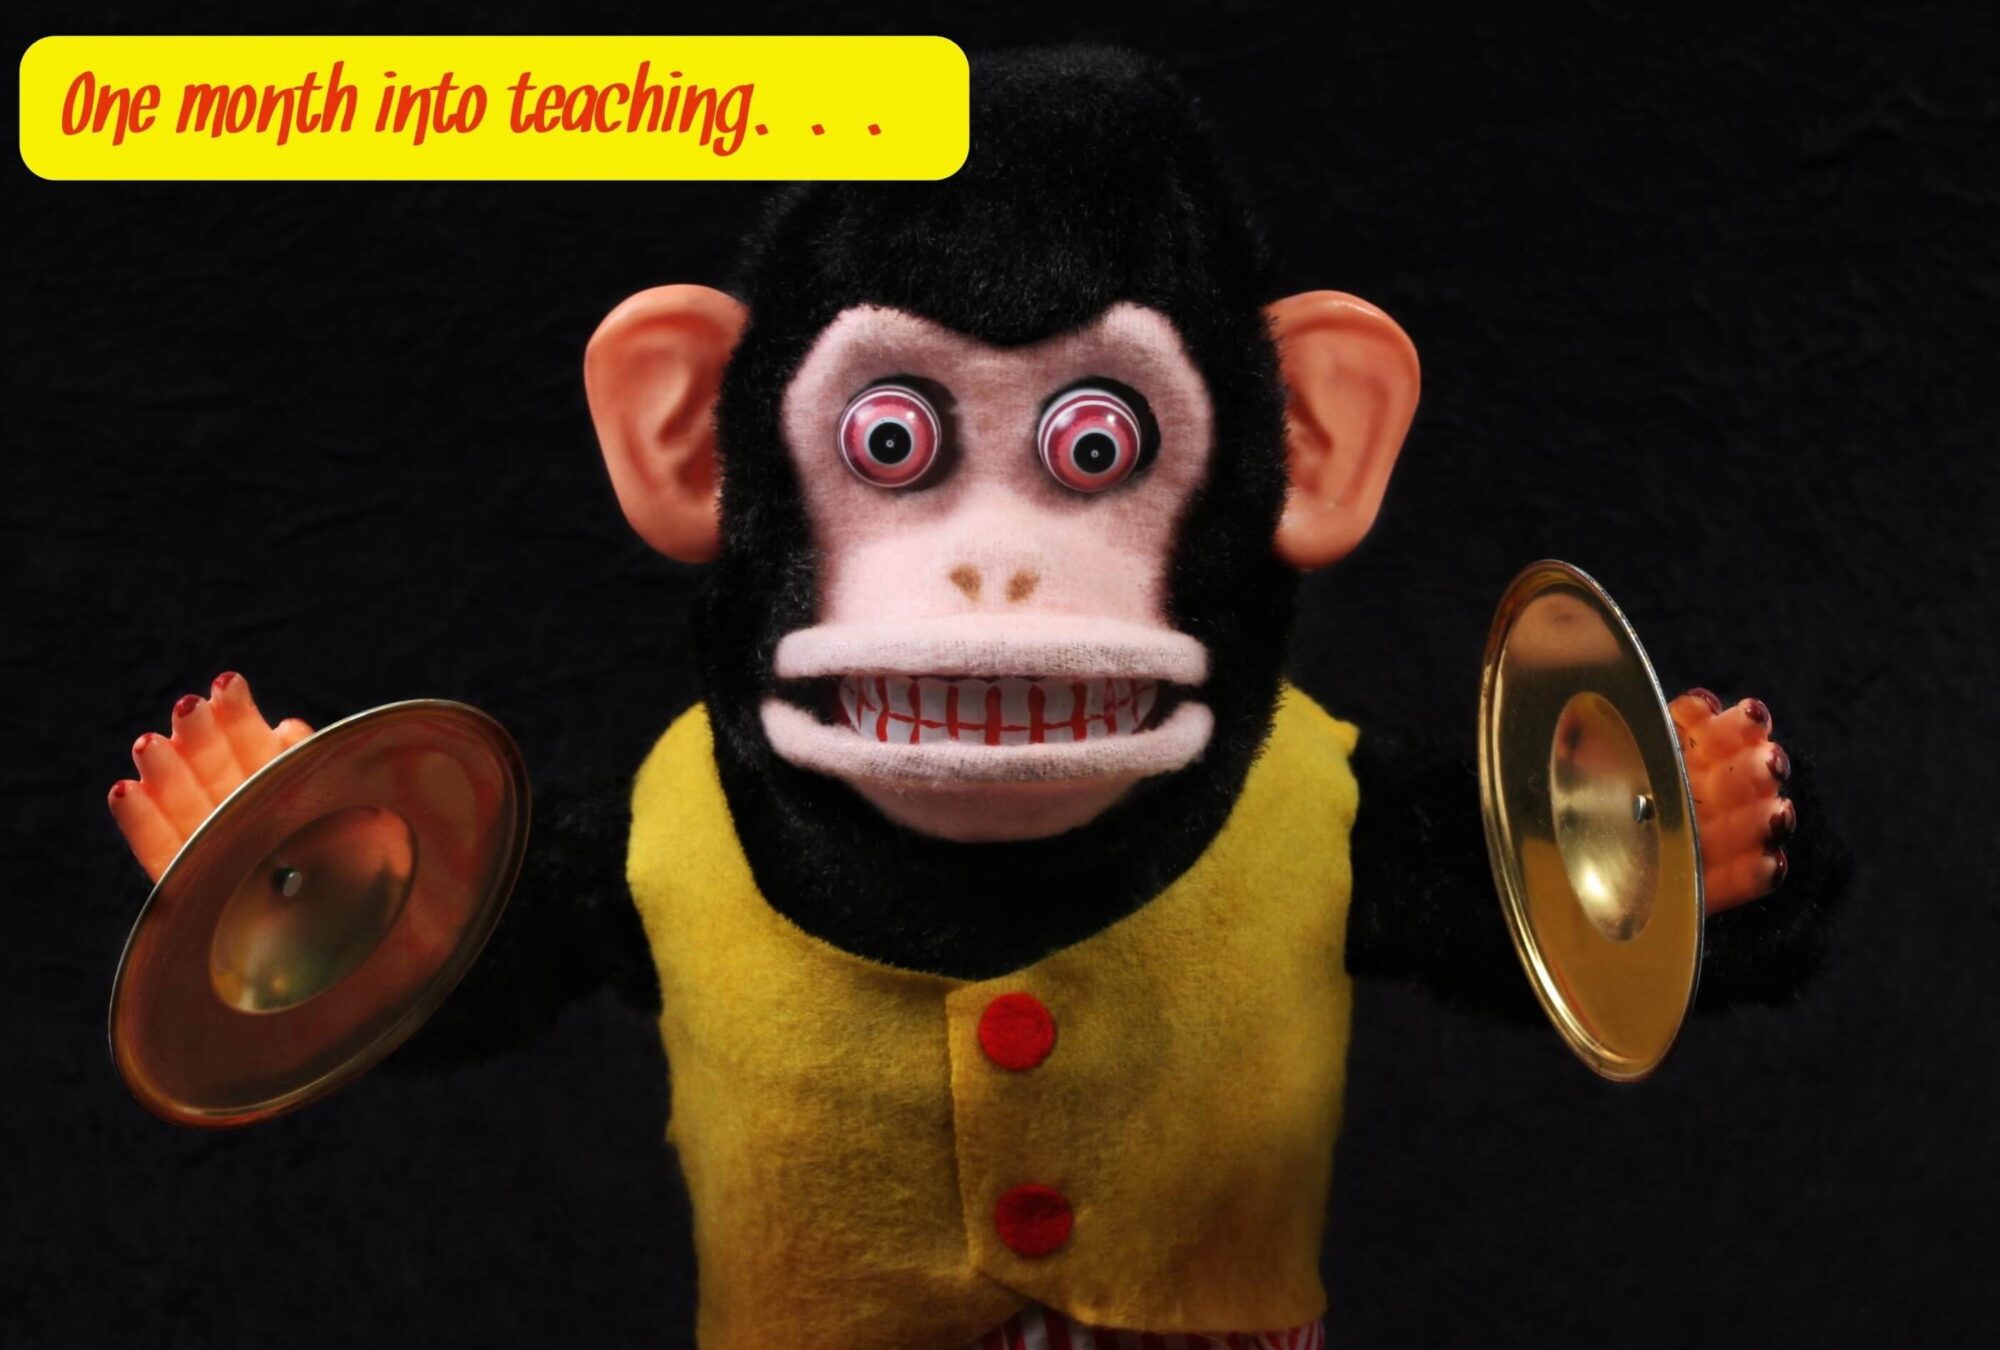 A toy monkey with cymbals looking crazy representing teachers who don't set boundaries with work expectations.